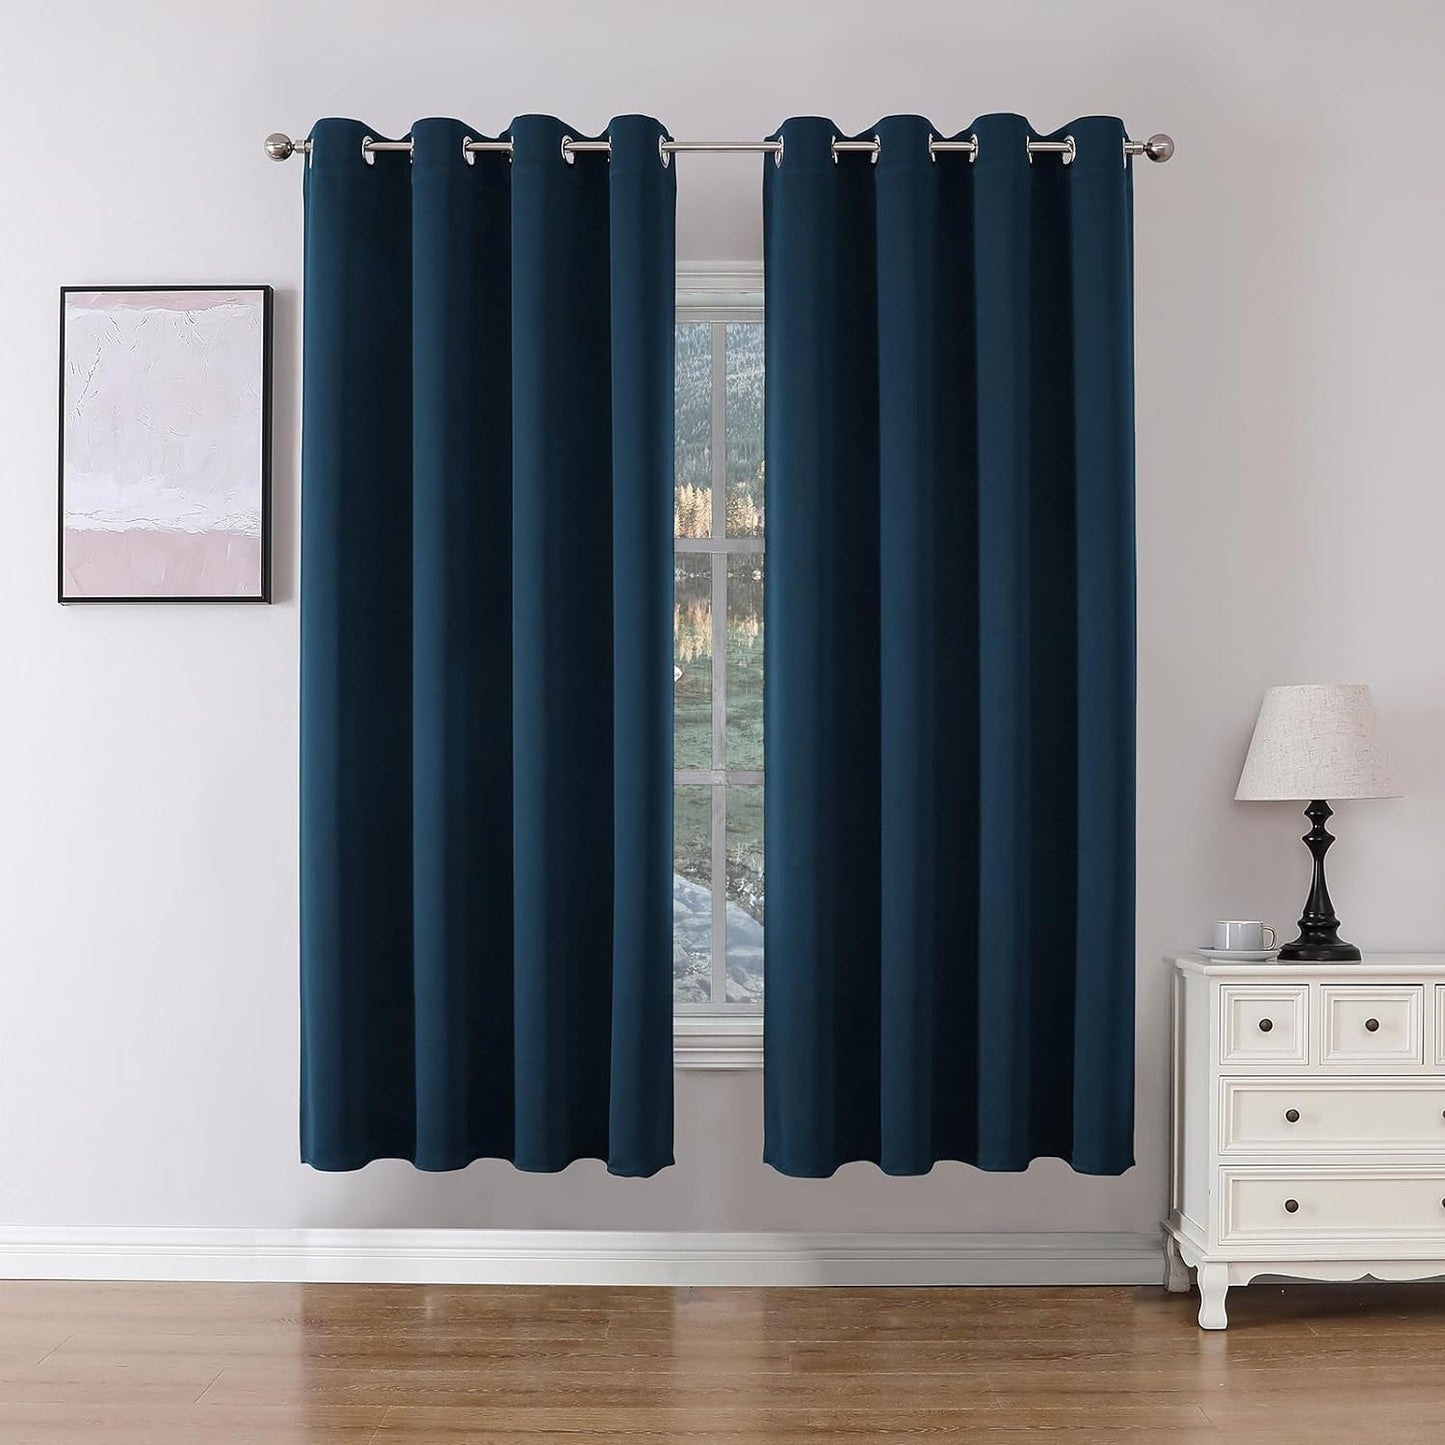 Joydeco Blackout Curtains 84 Inch Length 2 Panels Set, Thermal Insulated Long Curtains& Drapes 2 Burg, Room Darkening Grommet Curtains for Bedroom Living Room Window (Black, W52 X L84 Inch)  Joydeco Navy Blue 52W X 72L Inch X 2 Panels 